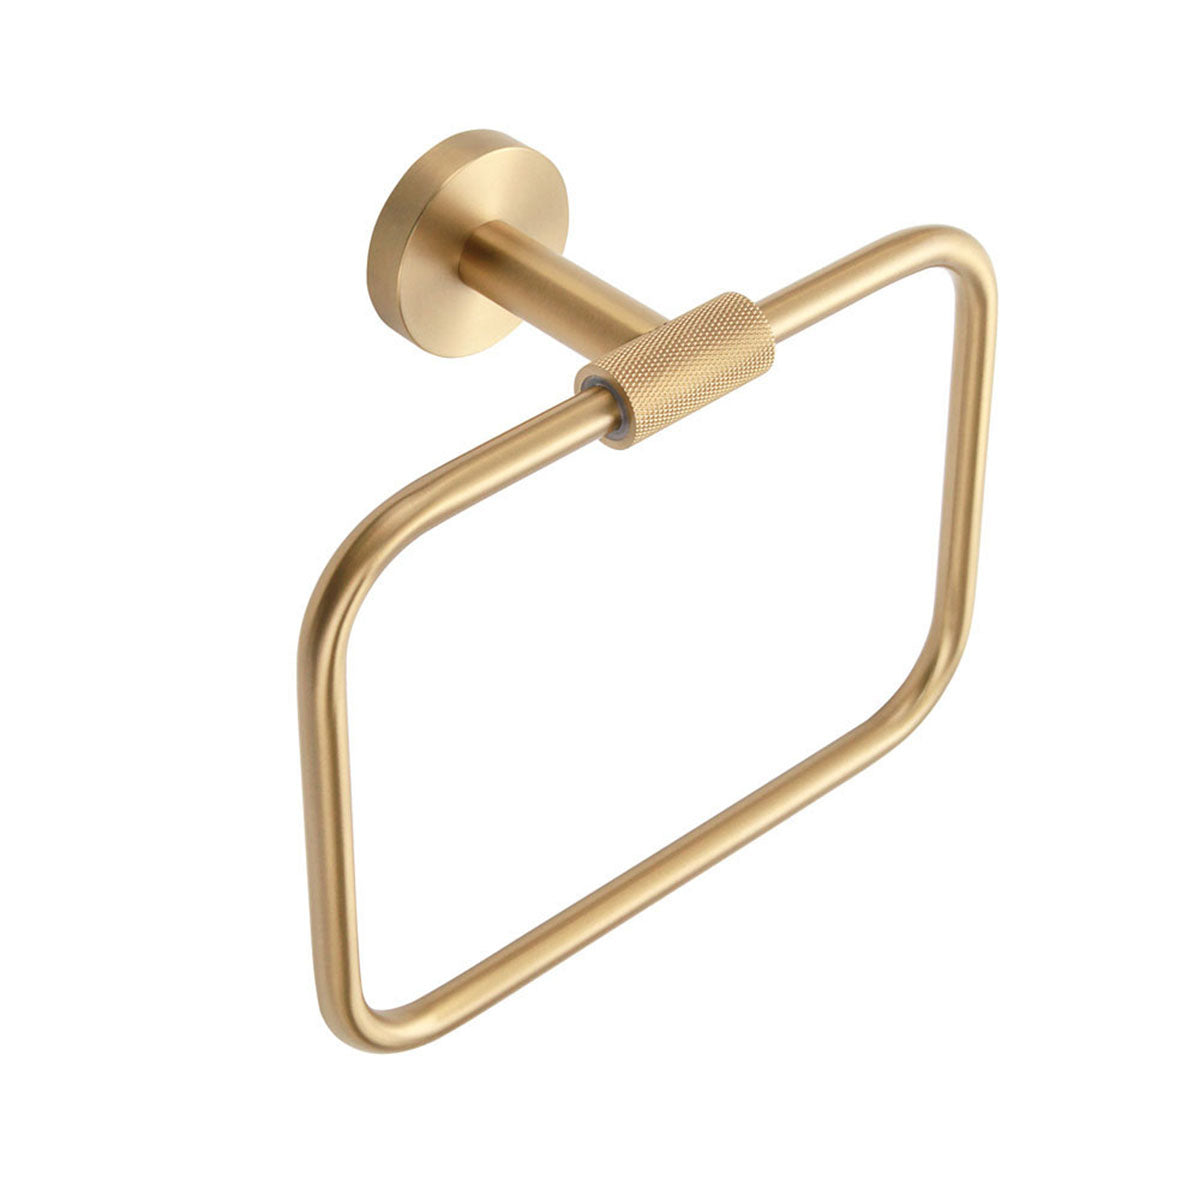 Harbour Knurled Towel Ring Brushed Brass